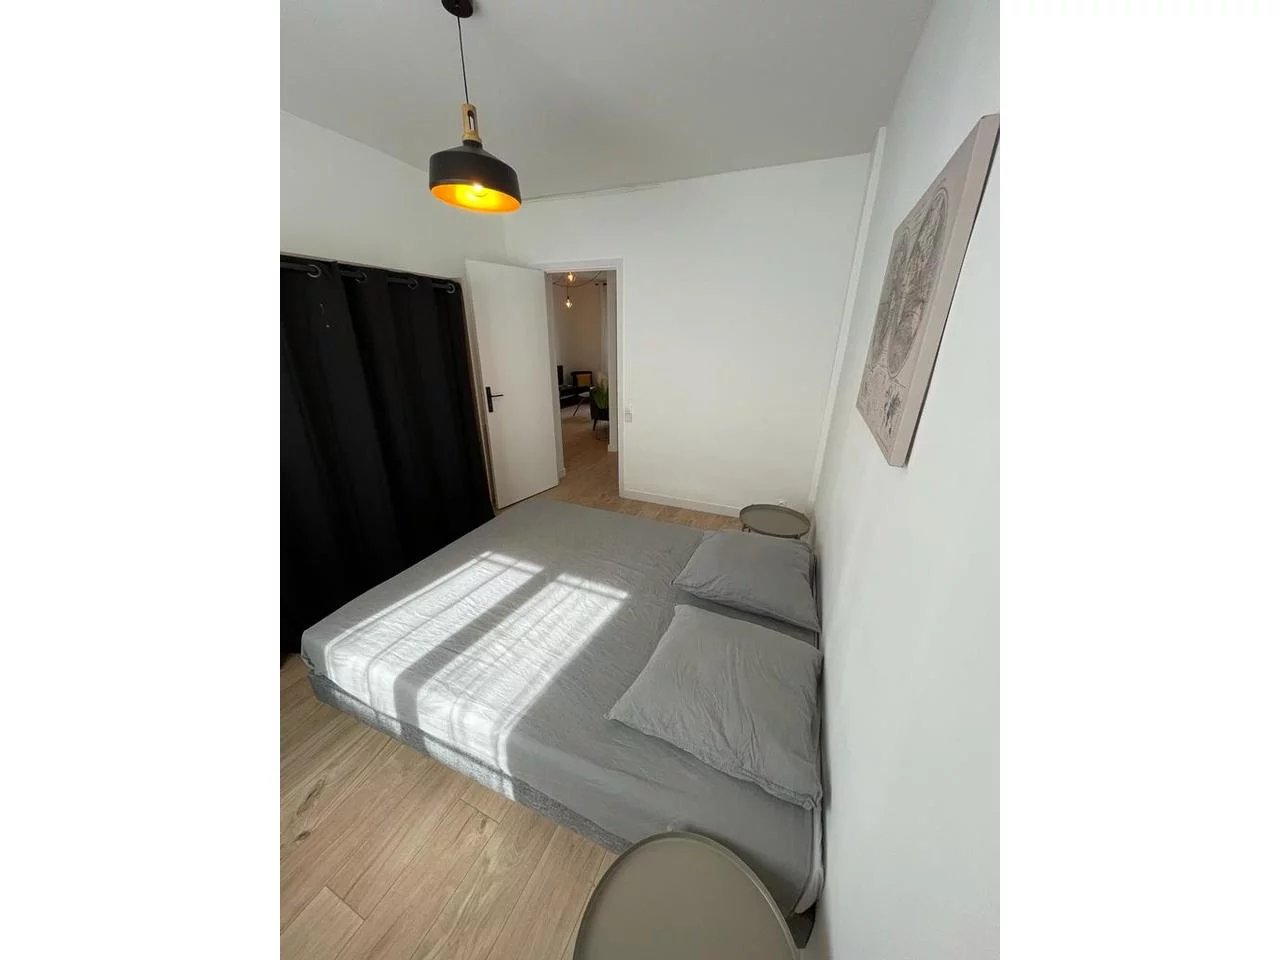 Appartement  3 Rooms 53m2  for sale   230 000 €